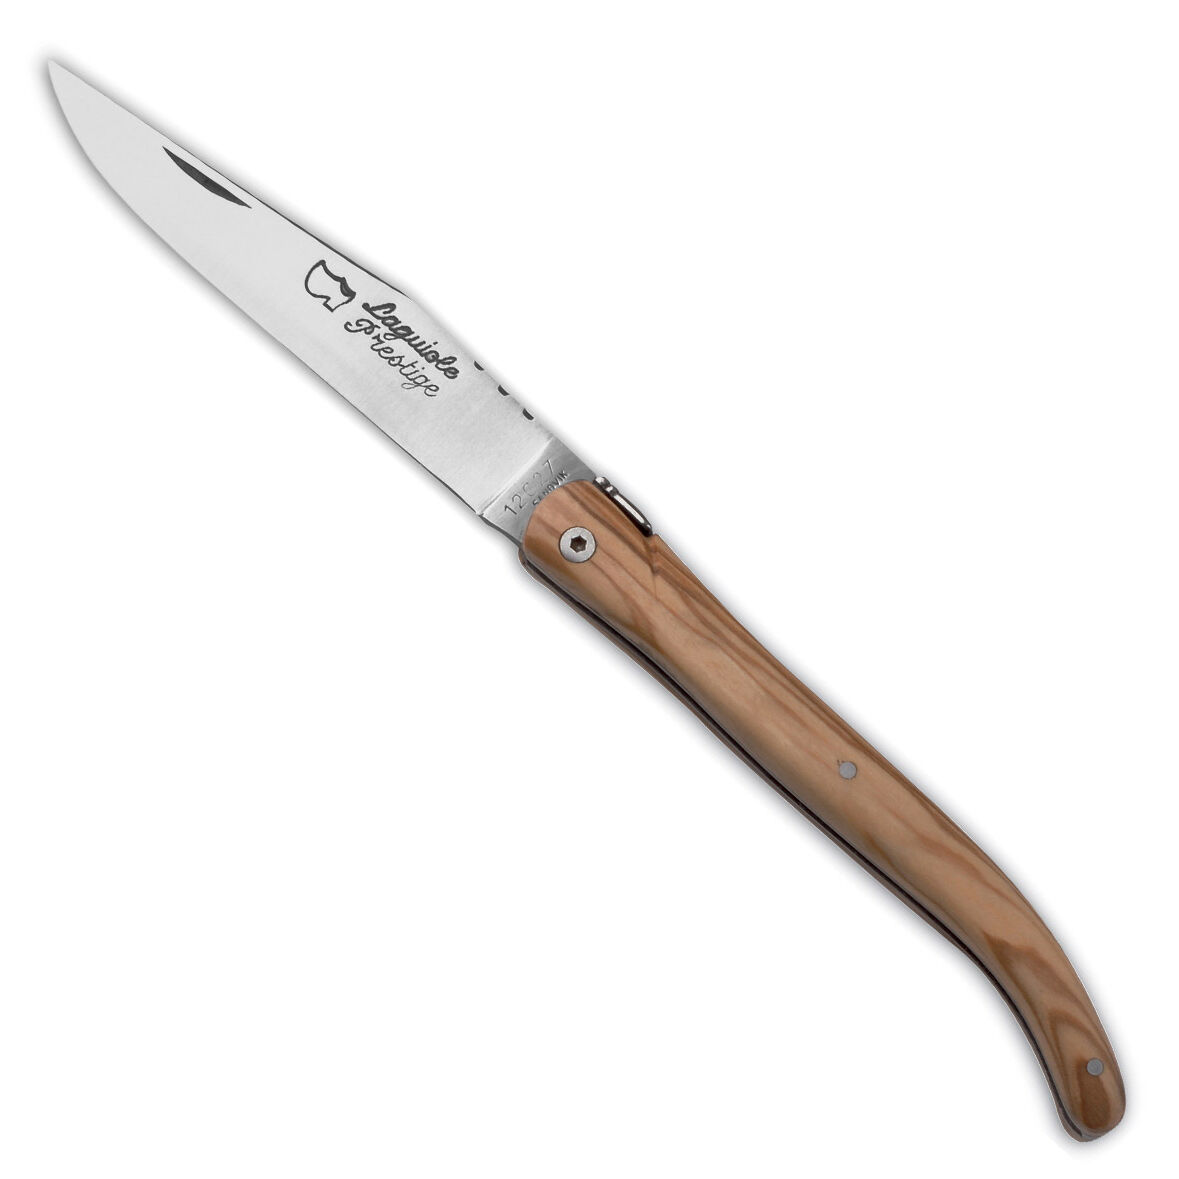 Full Handle Laguiole Tradition - Olive wood